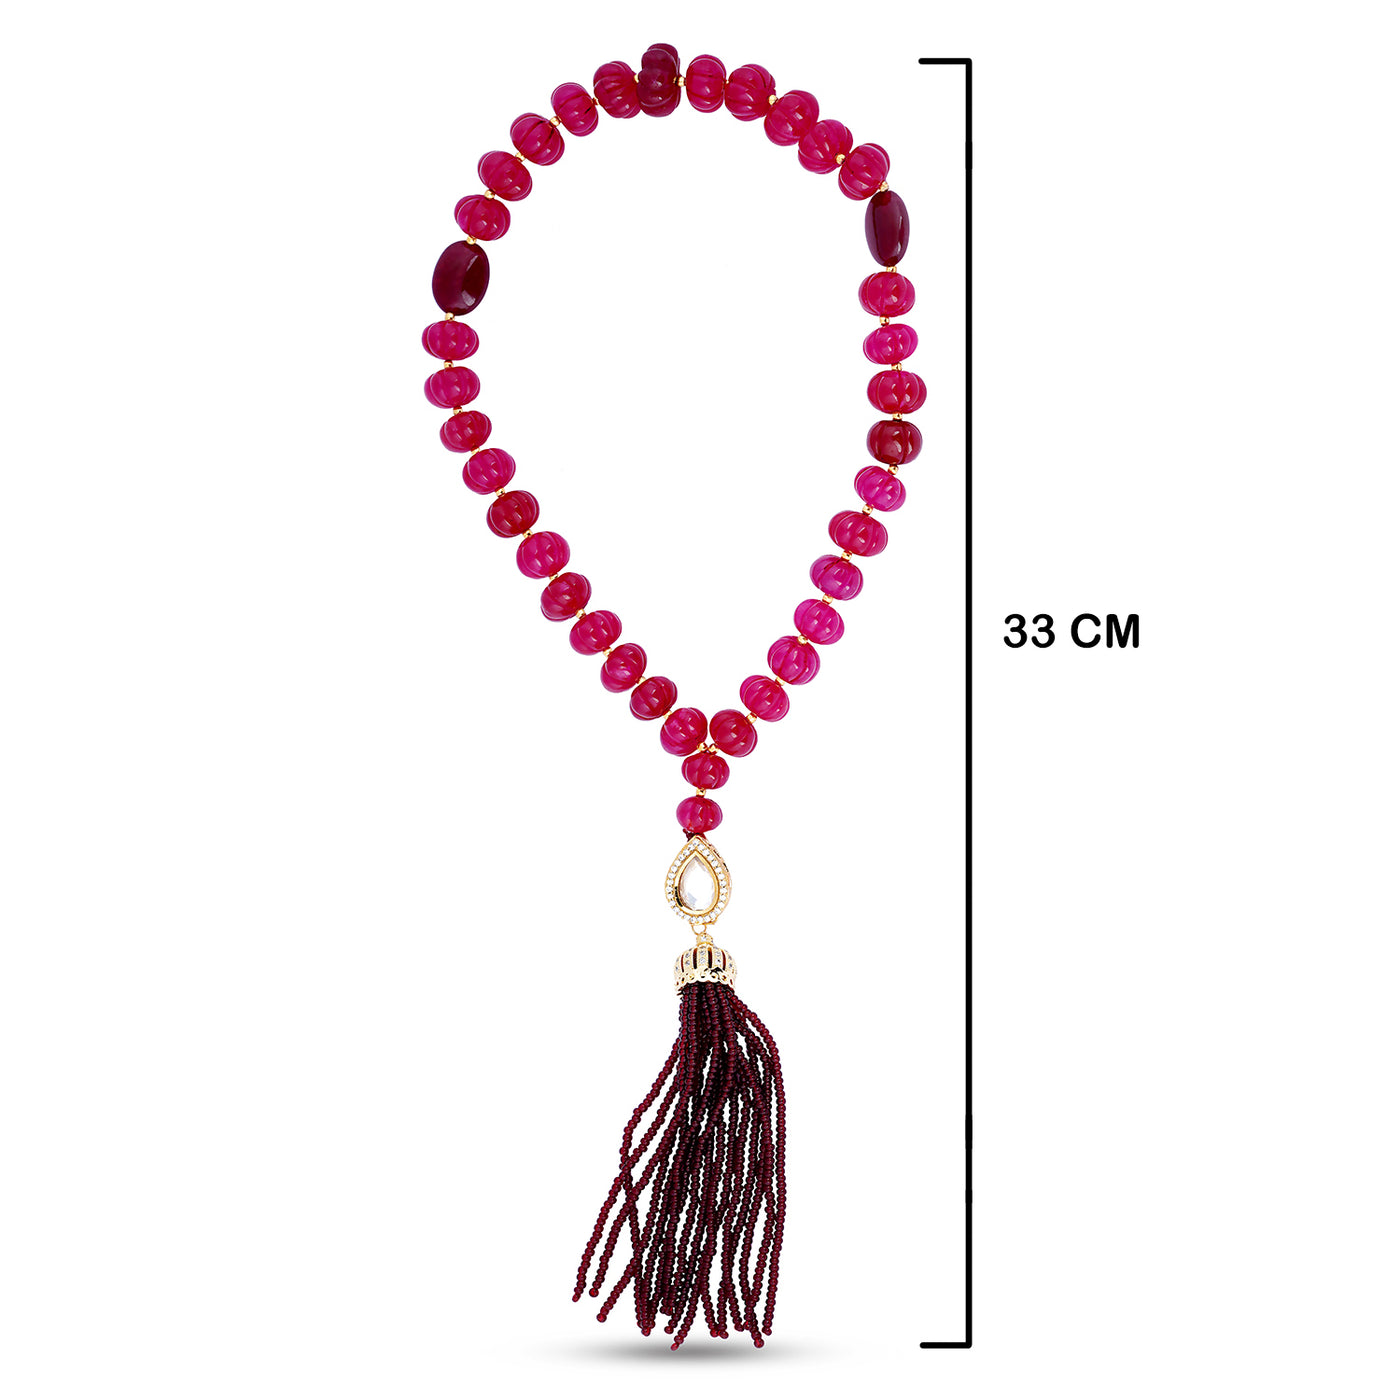 Red Bead Tasbih with measurements in cm. 33cm in length.